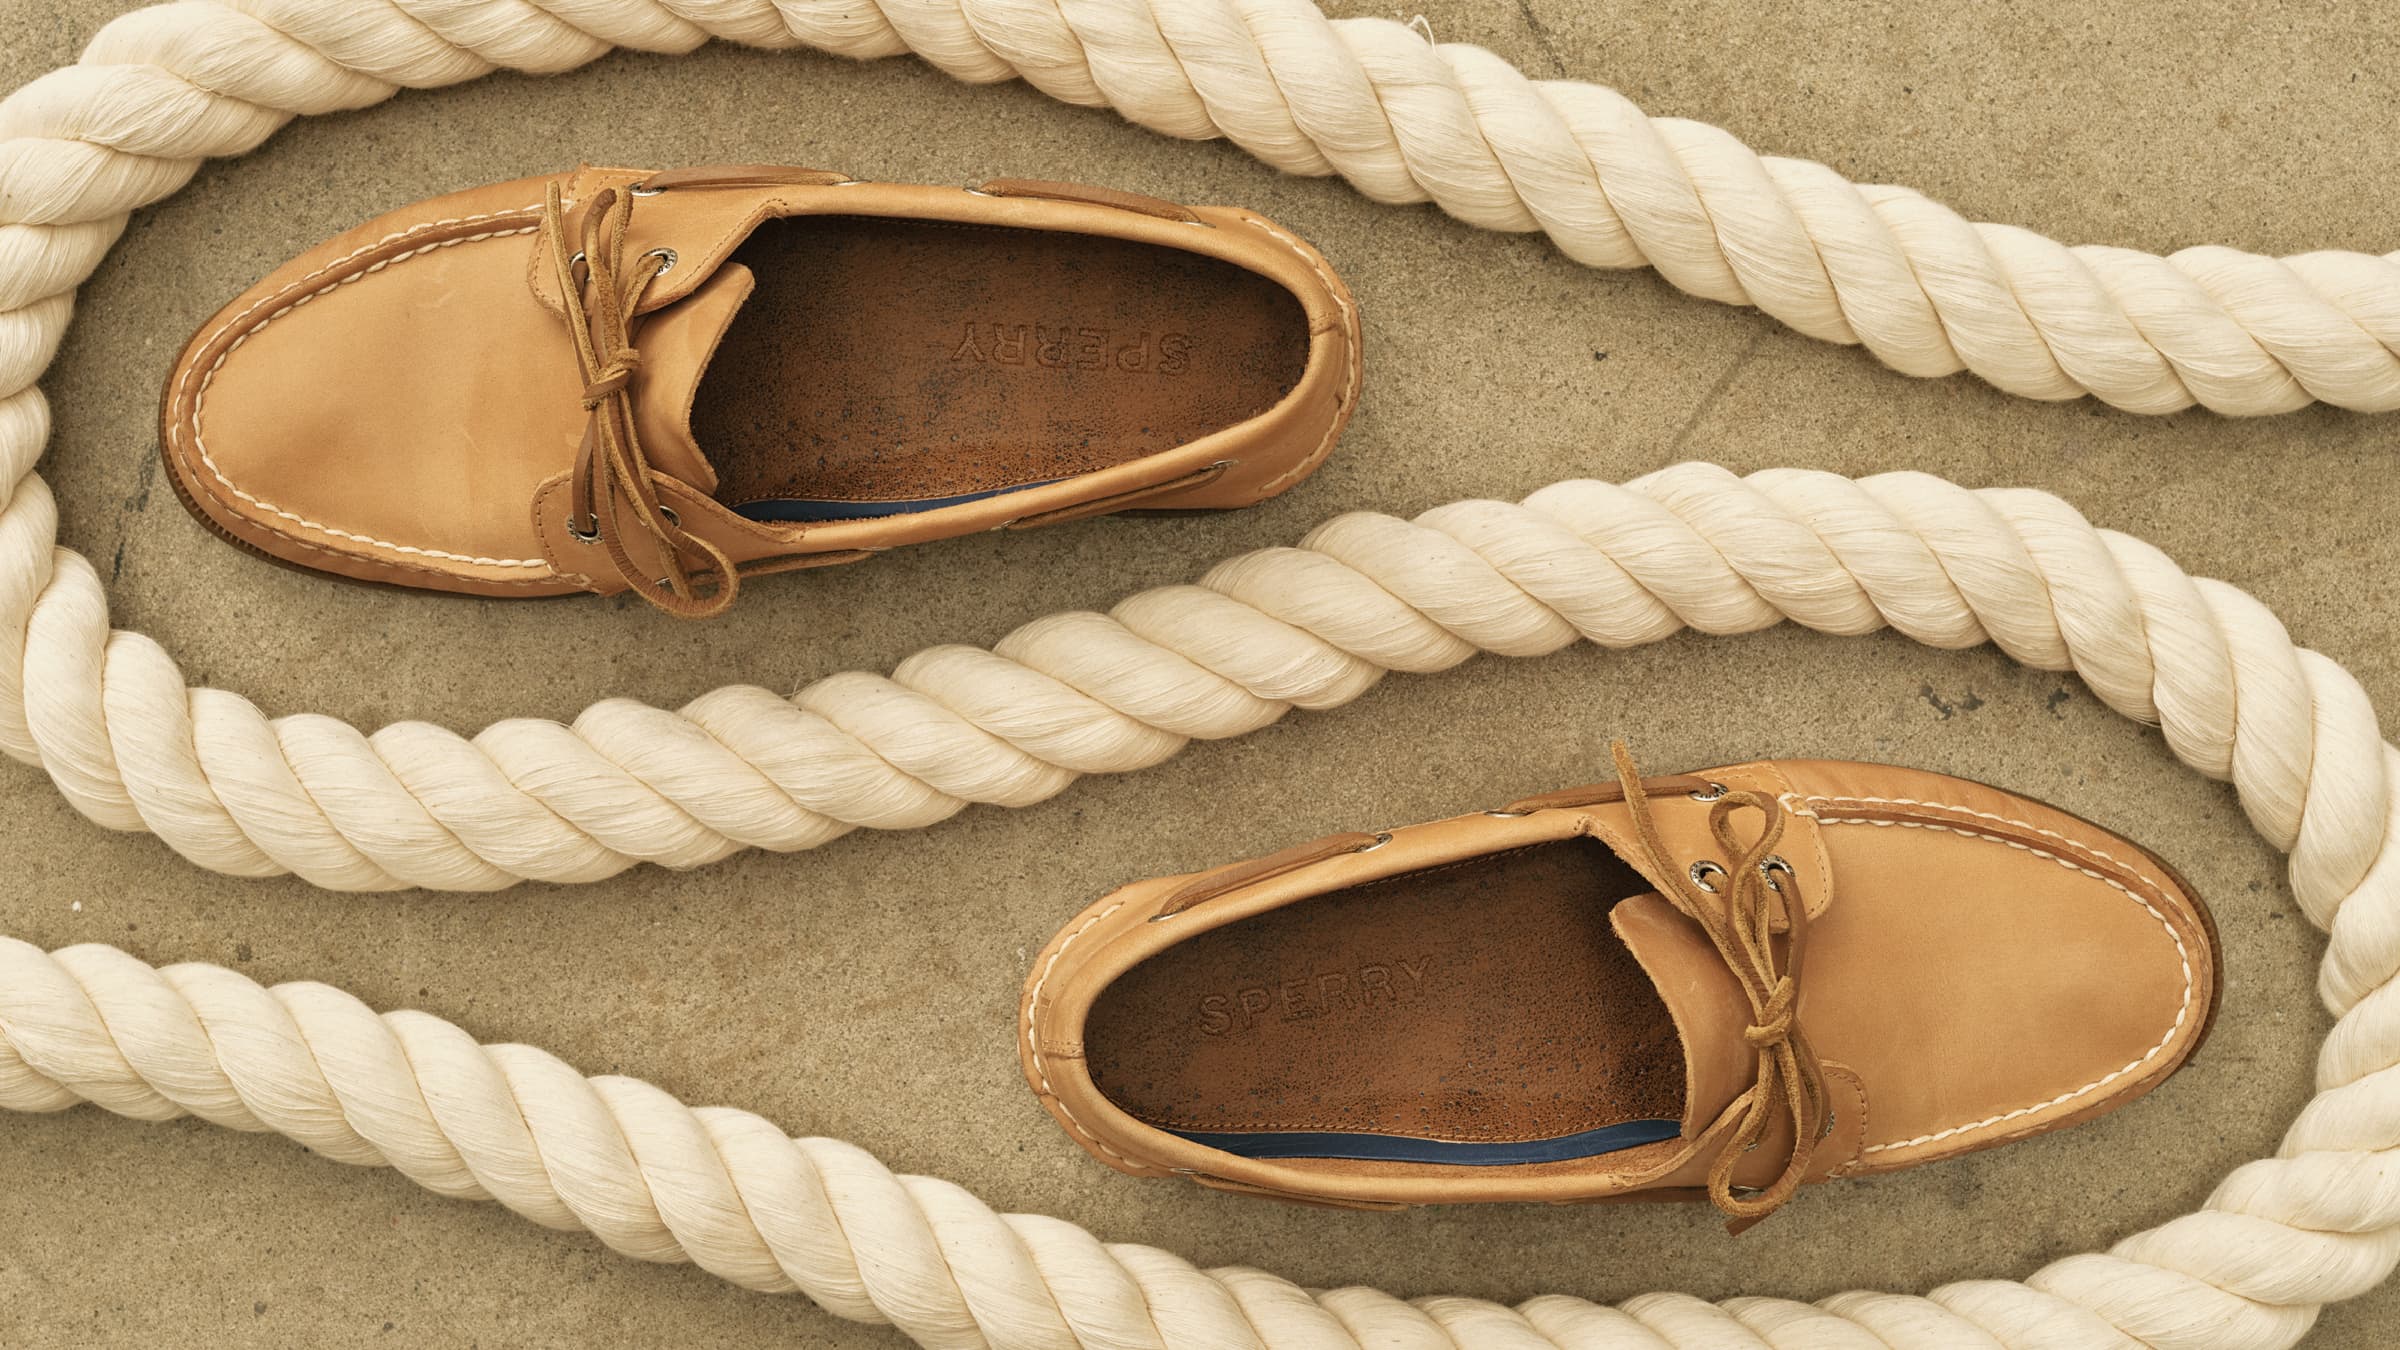 Top-Sider Boat Shoes & Deck Shoes for Men | Sperry | Sperry US